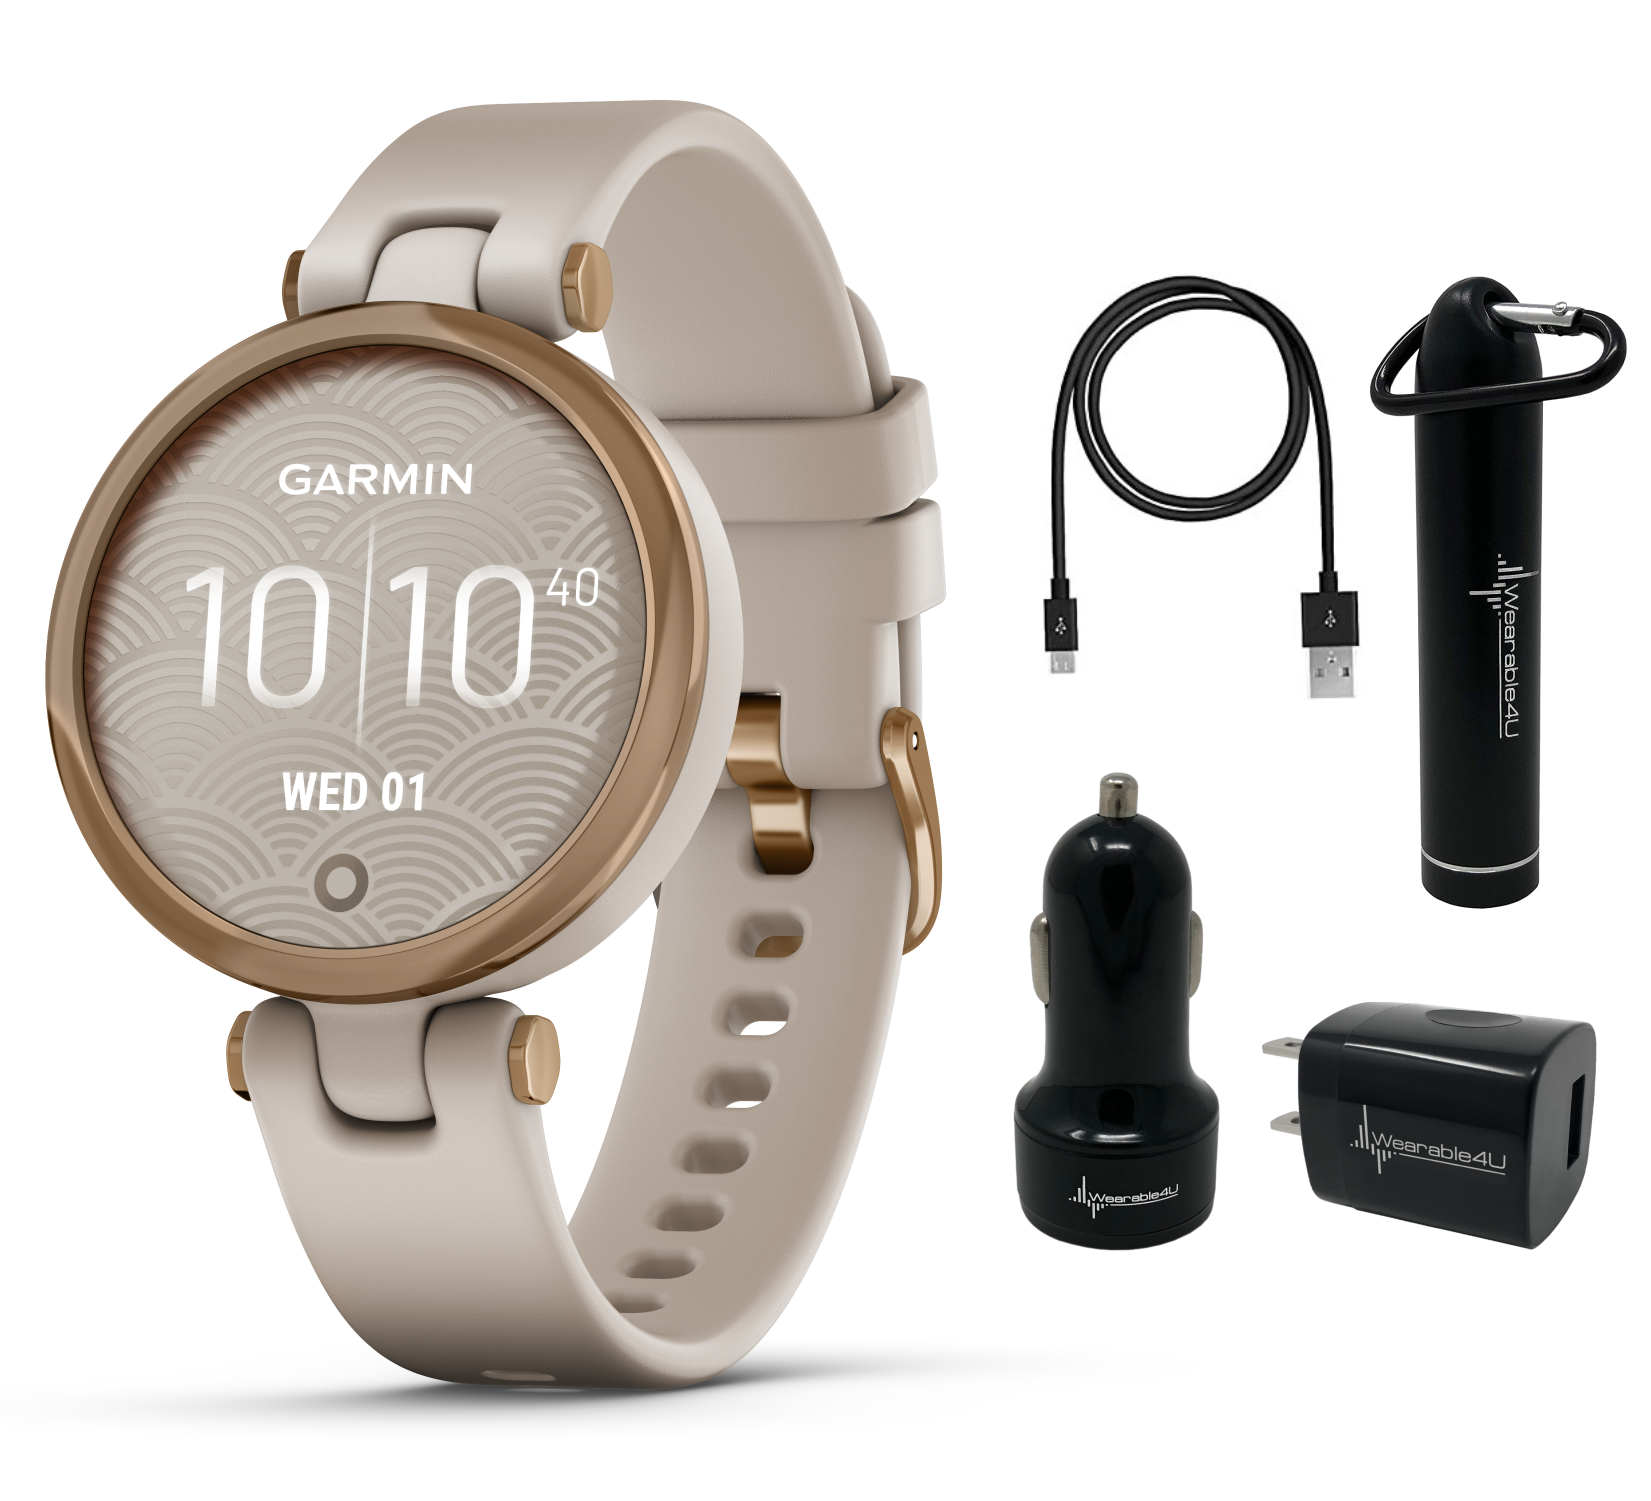 Getting Started with Garmin Lily Smartwatches